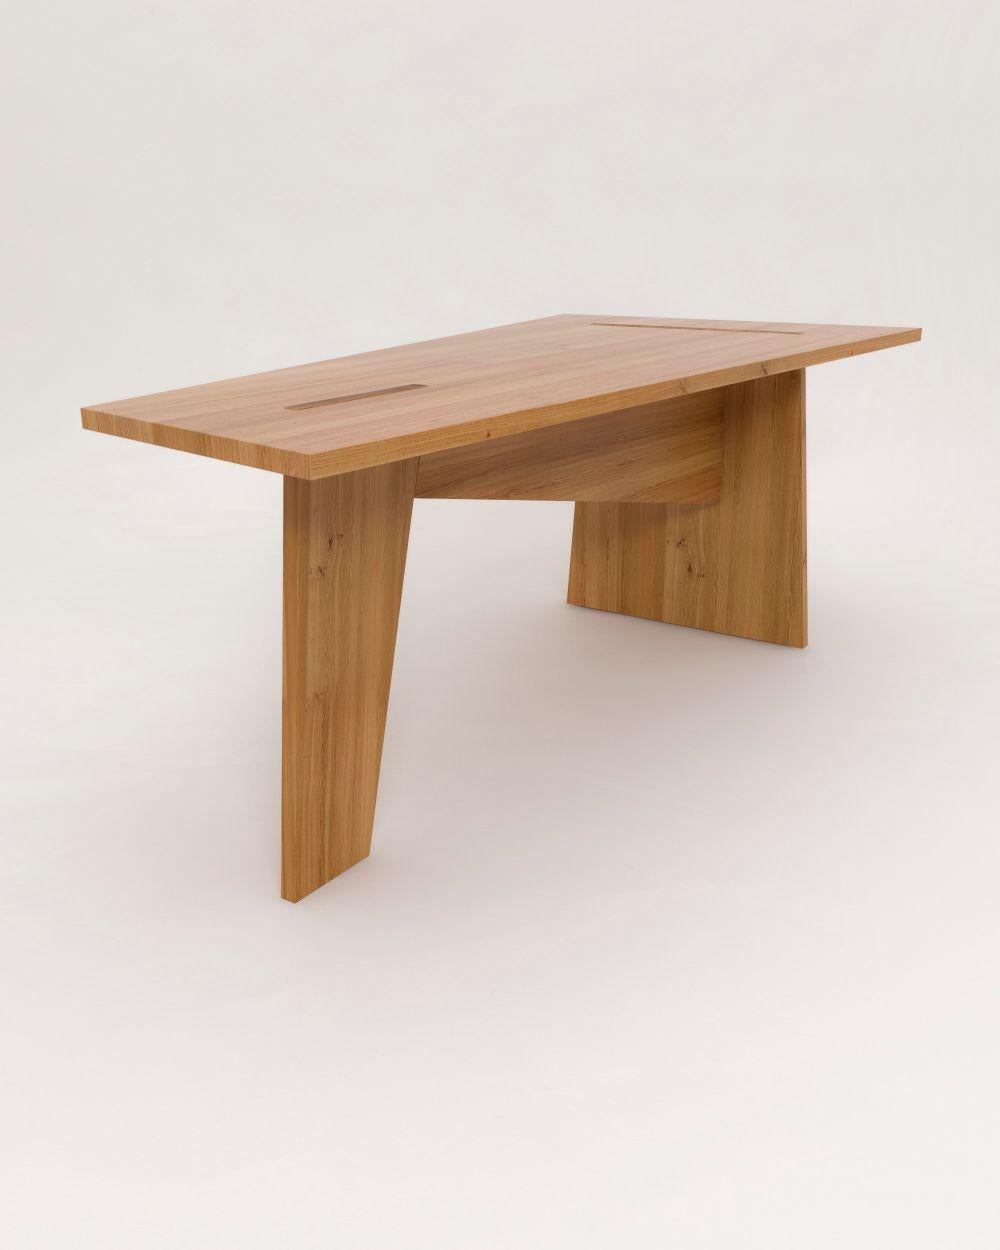 Crooked dining table by Nazara Lazaro
Dimensions: H 75 cm x W 200 cm x D 100 cm
Materials: Massive oak with oil wax surface

Also available in natural massive oak, walnut, and white lacquered wood.

The Crooked collection is an ongoing series